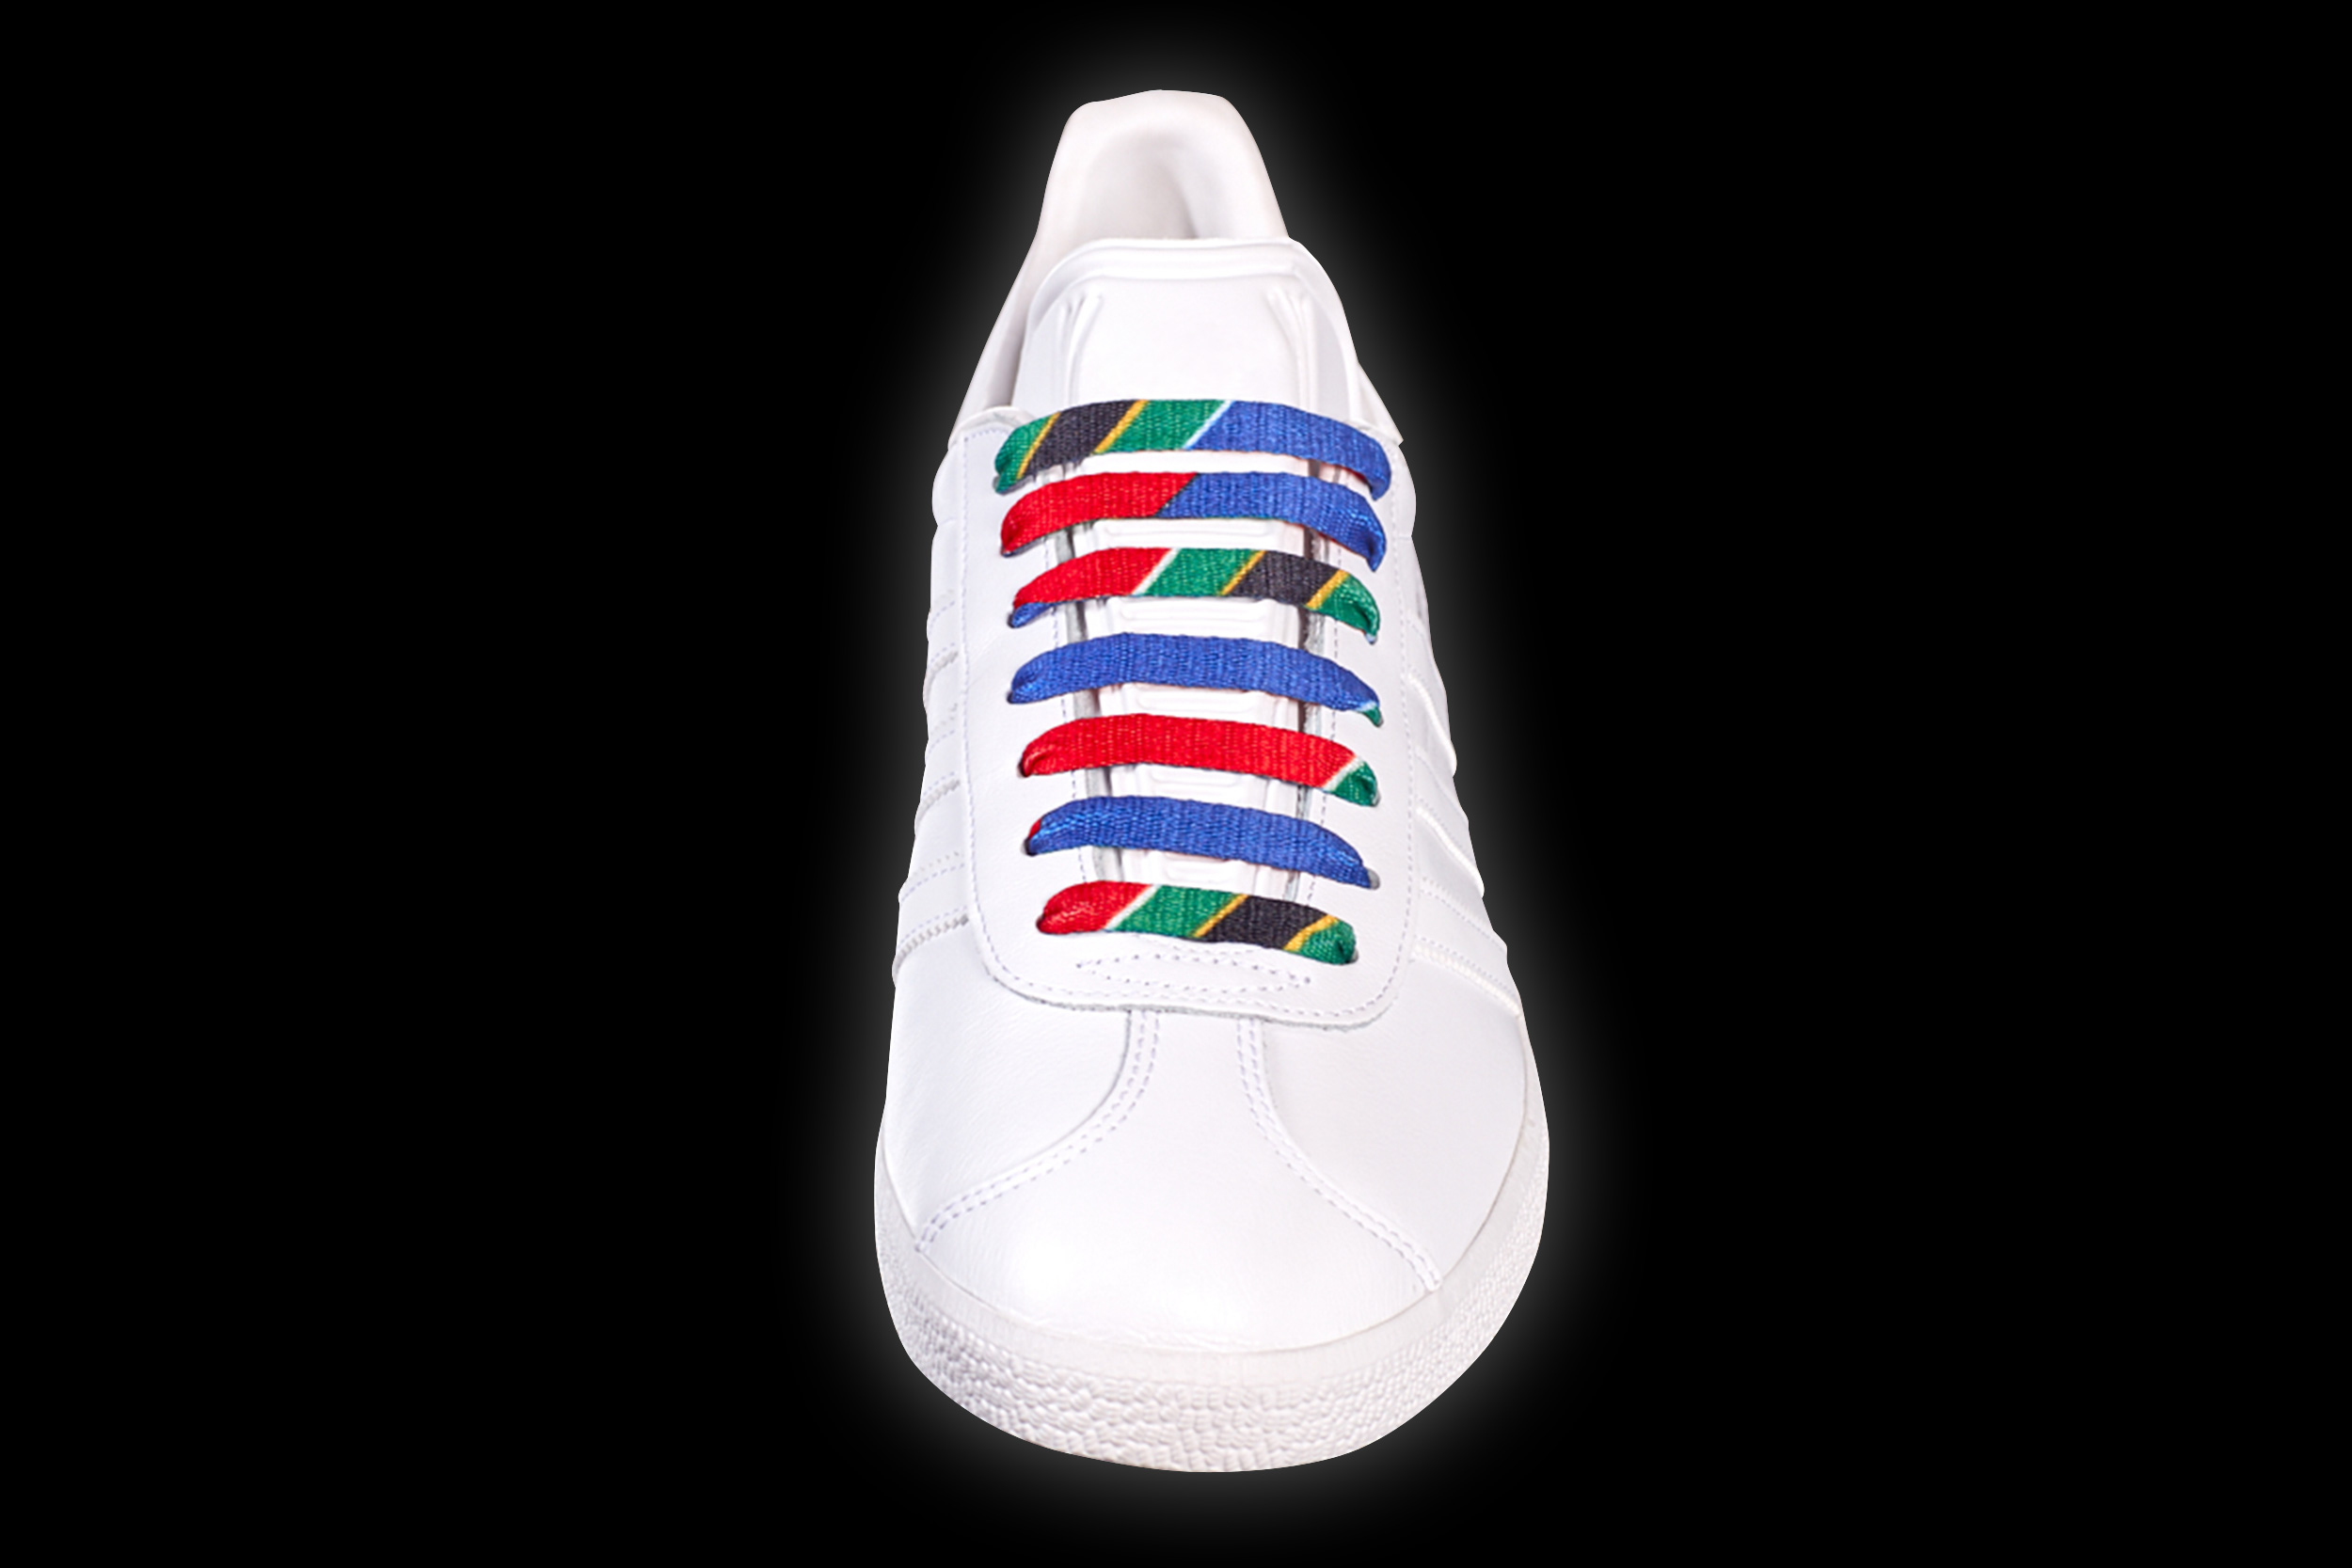 Kiwi_Laces_SouthAfrica_top.jpg